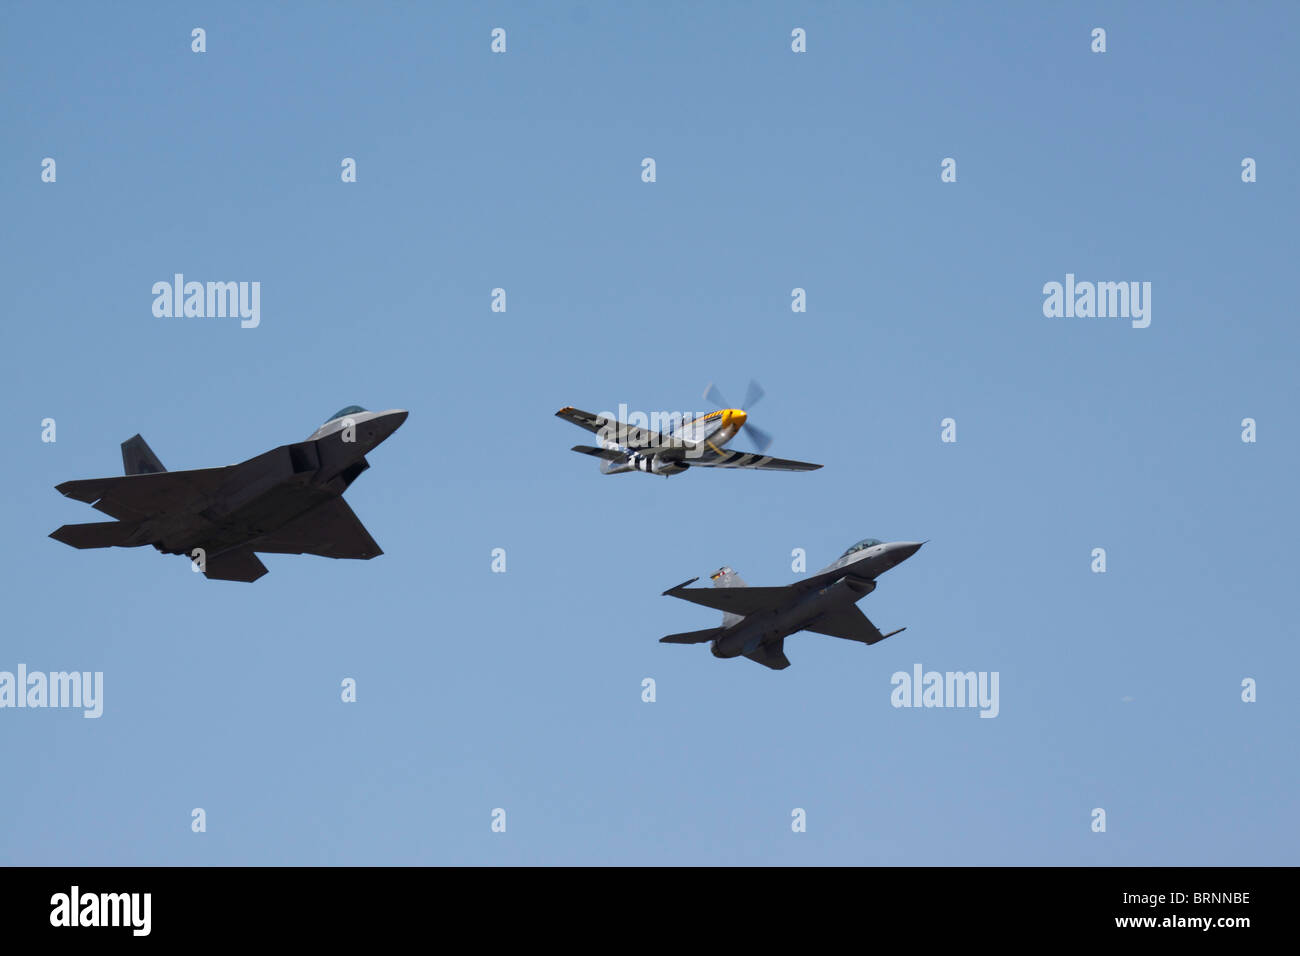 A trio of aircraft from yesterday and today. Stock Photo